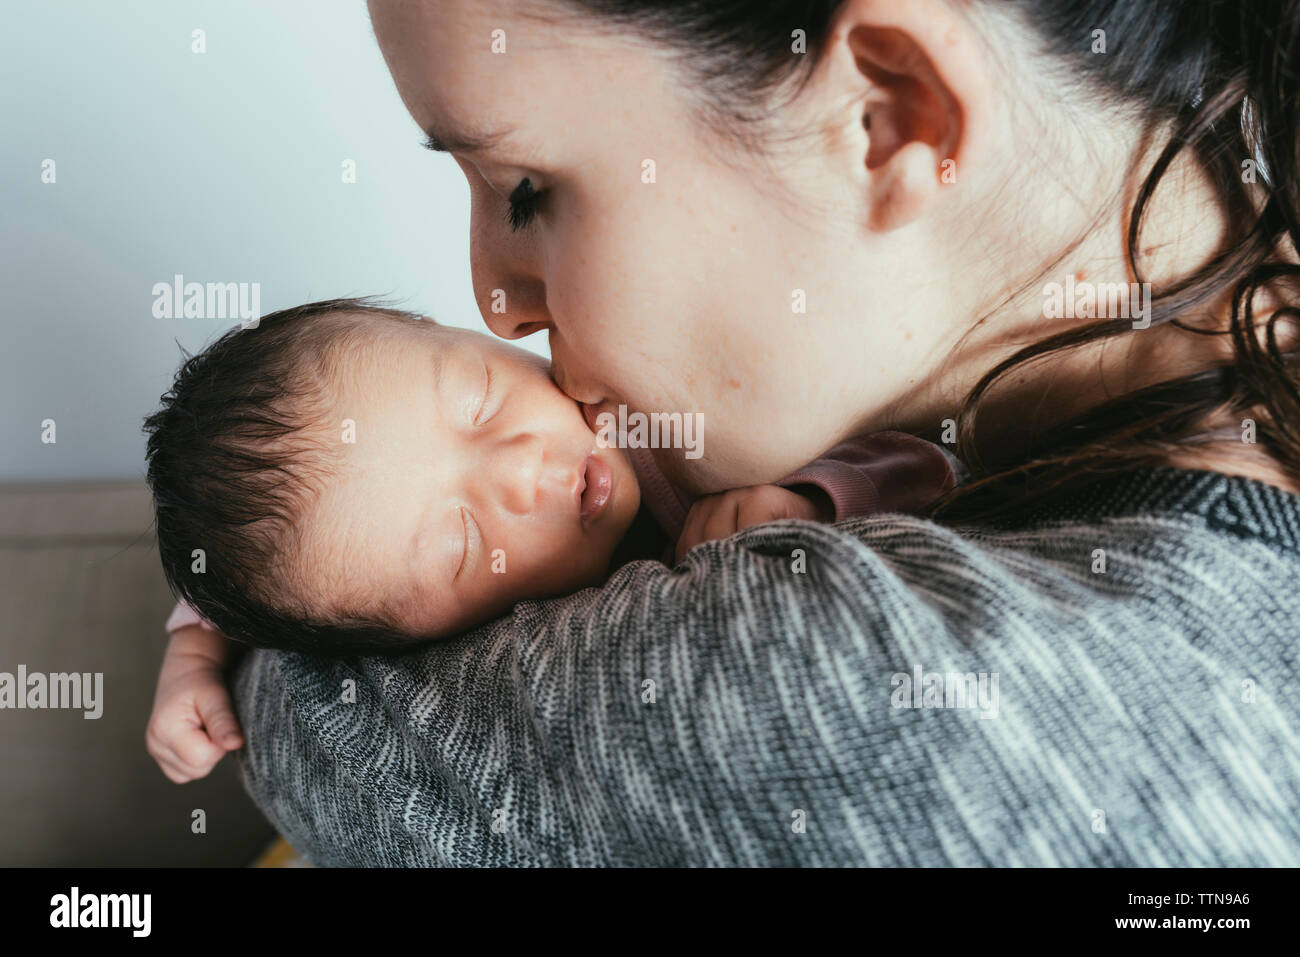 Close-up of woman kissing baby girl at home Banque D'Images